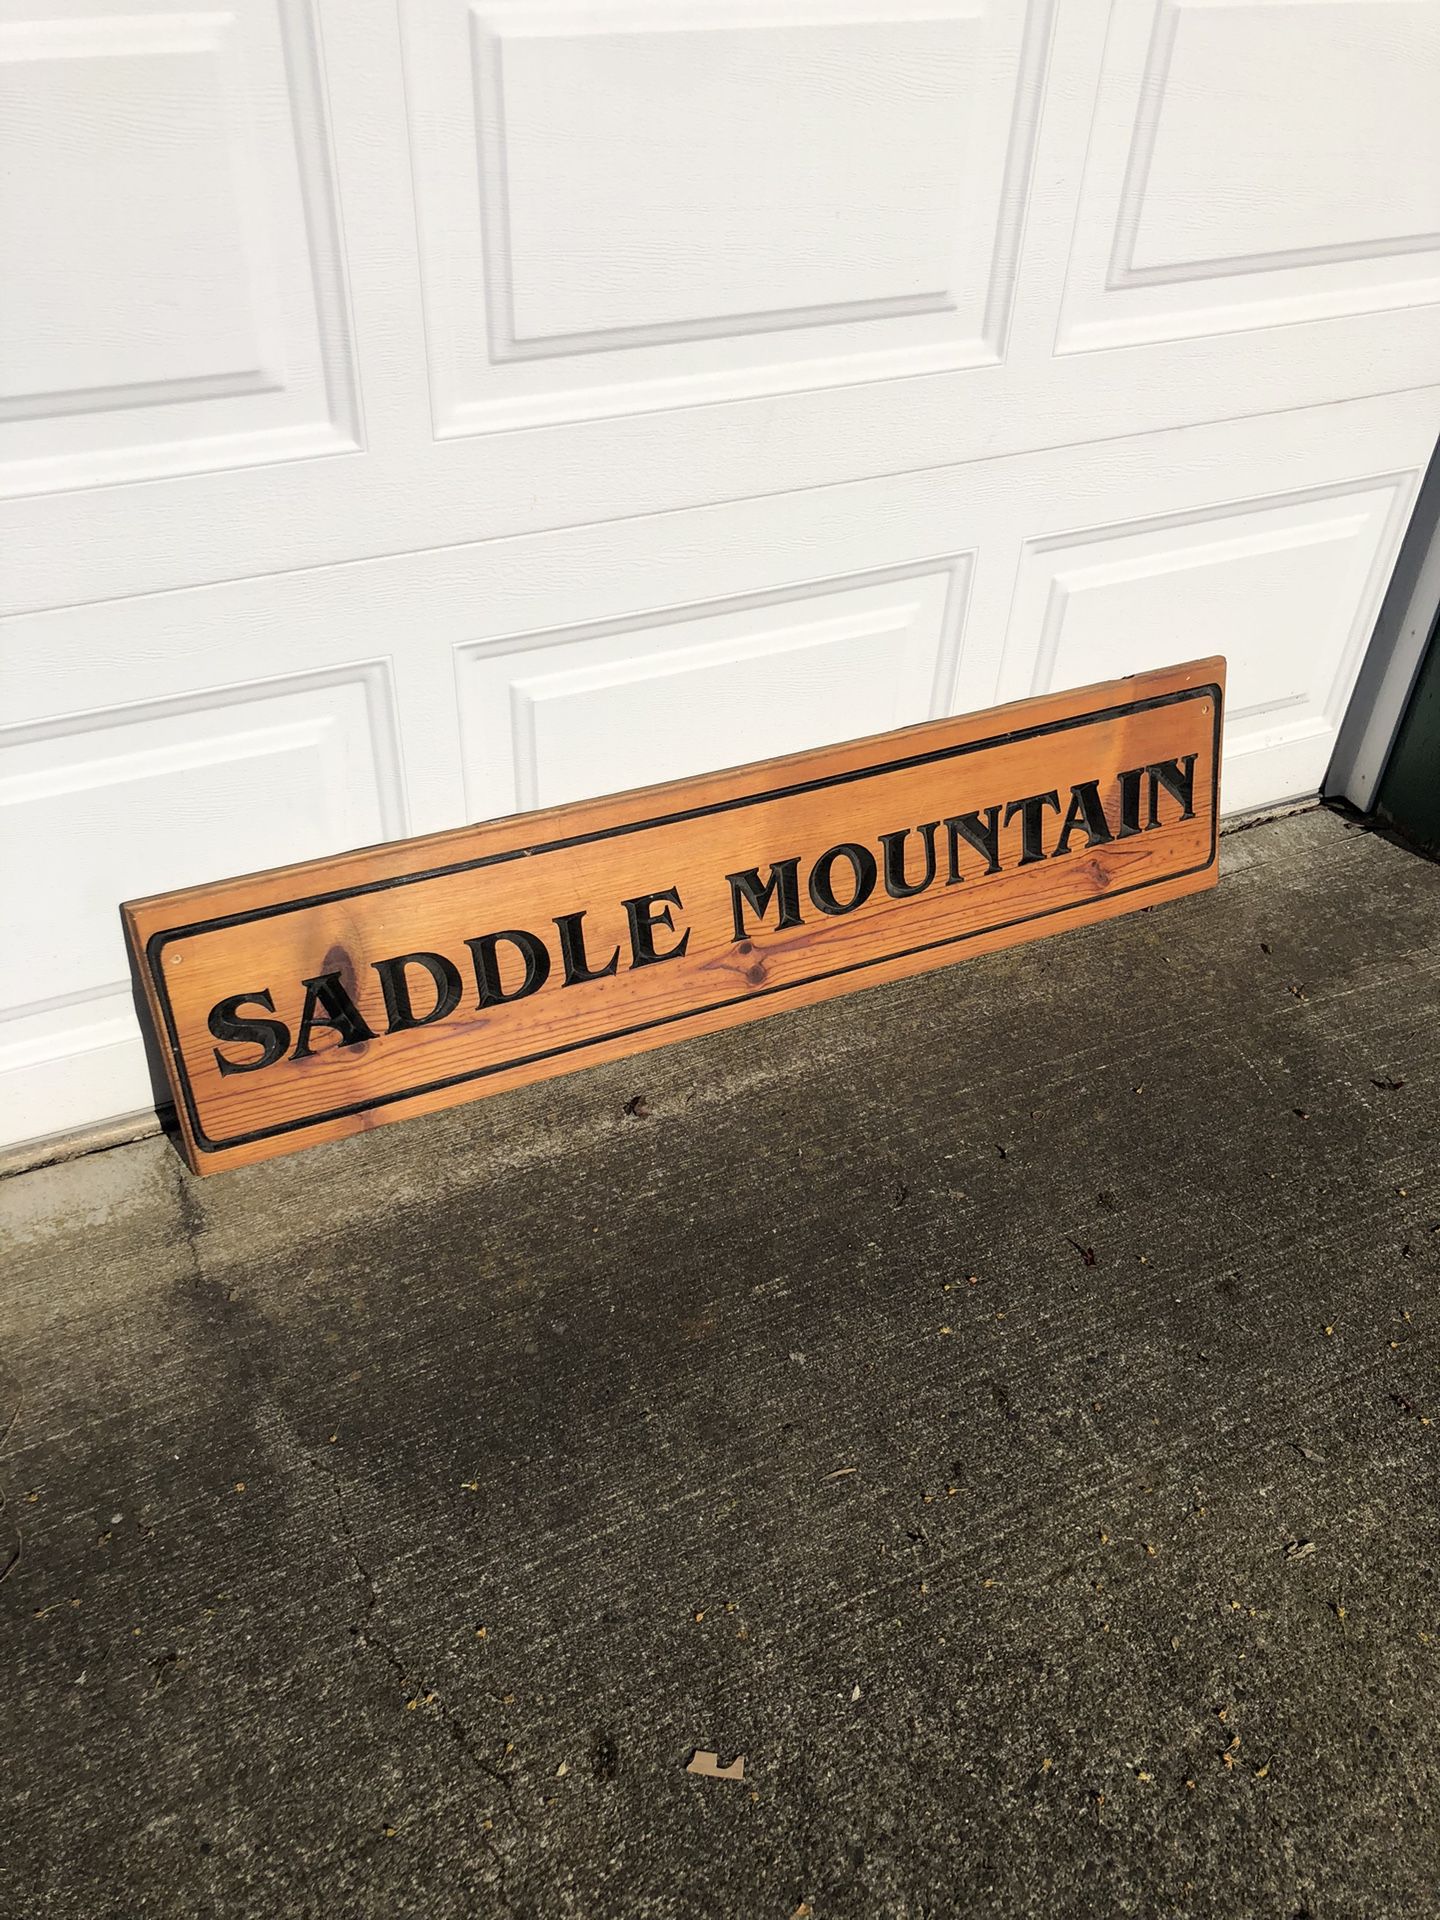 Saddle mountain handmade wooden sign in great condition.